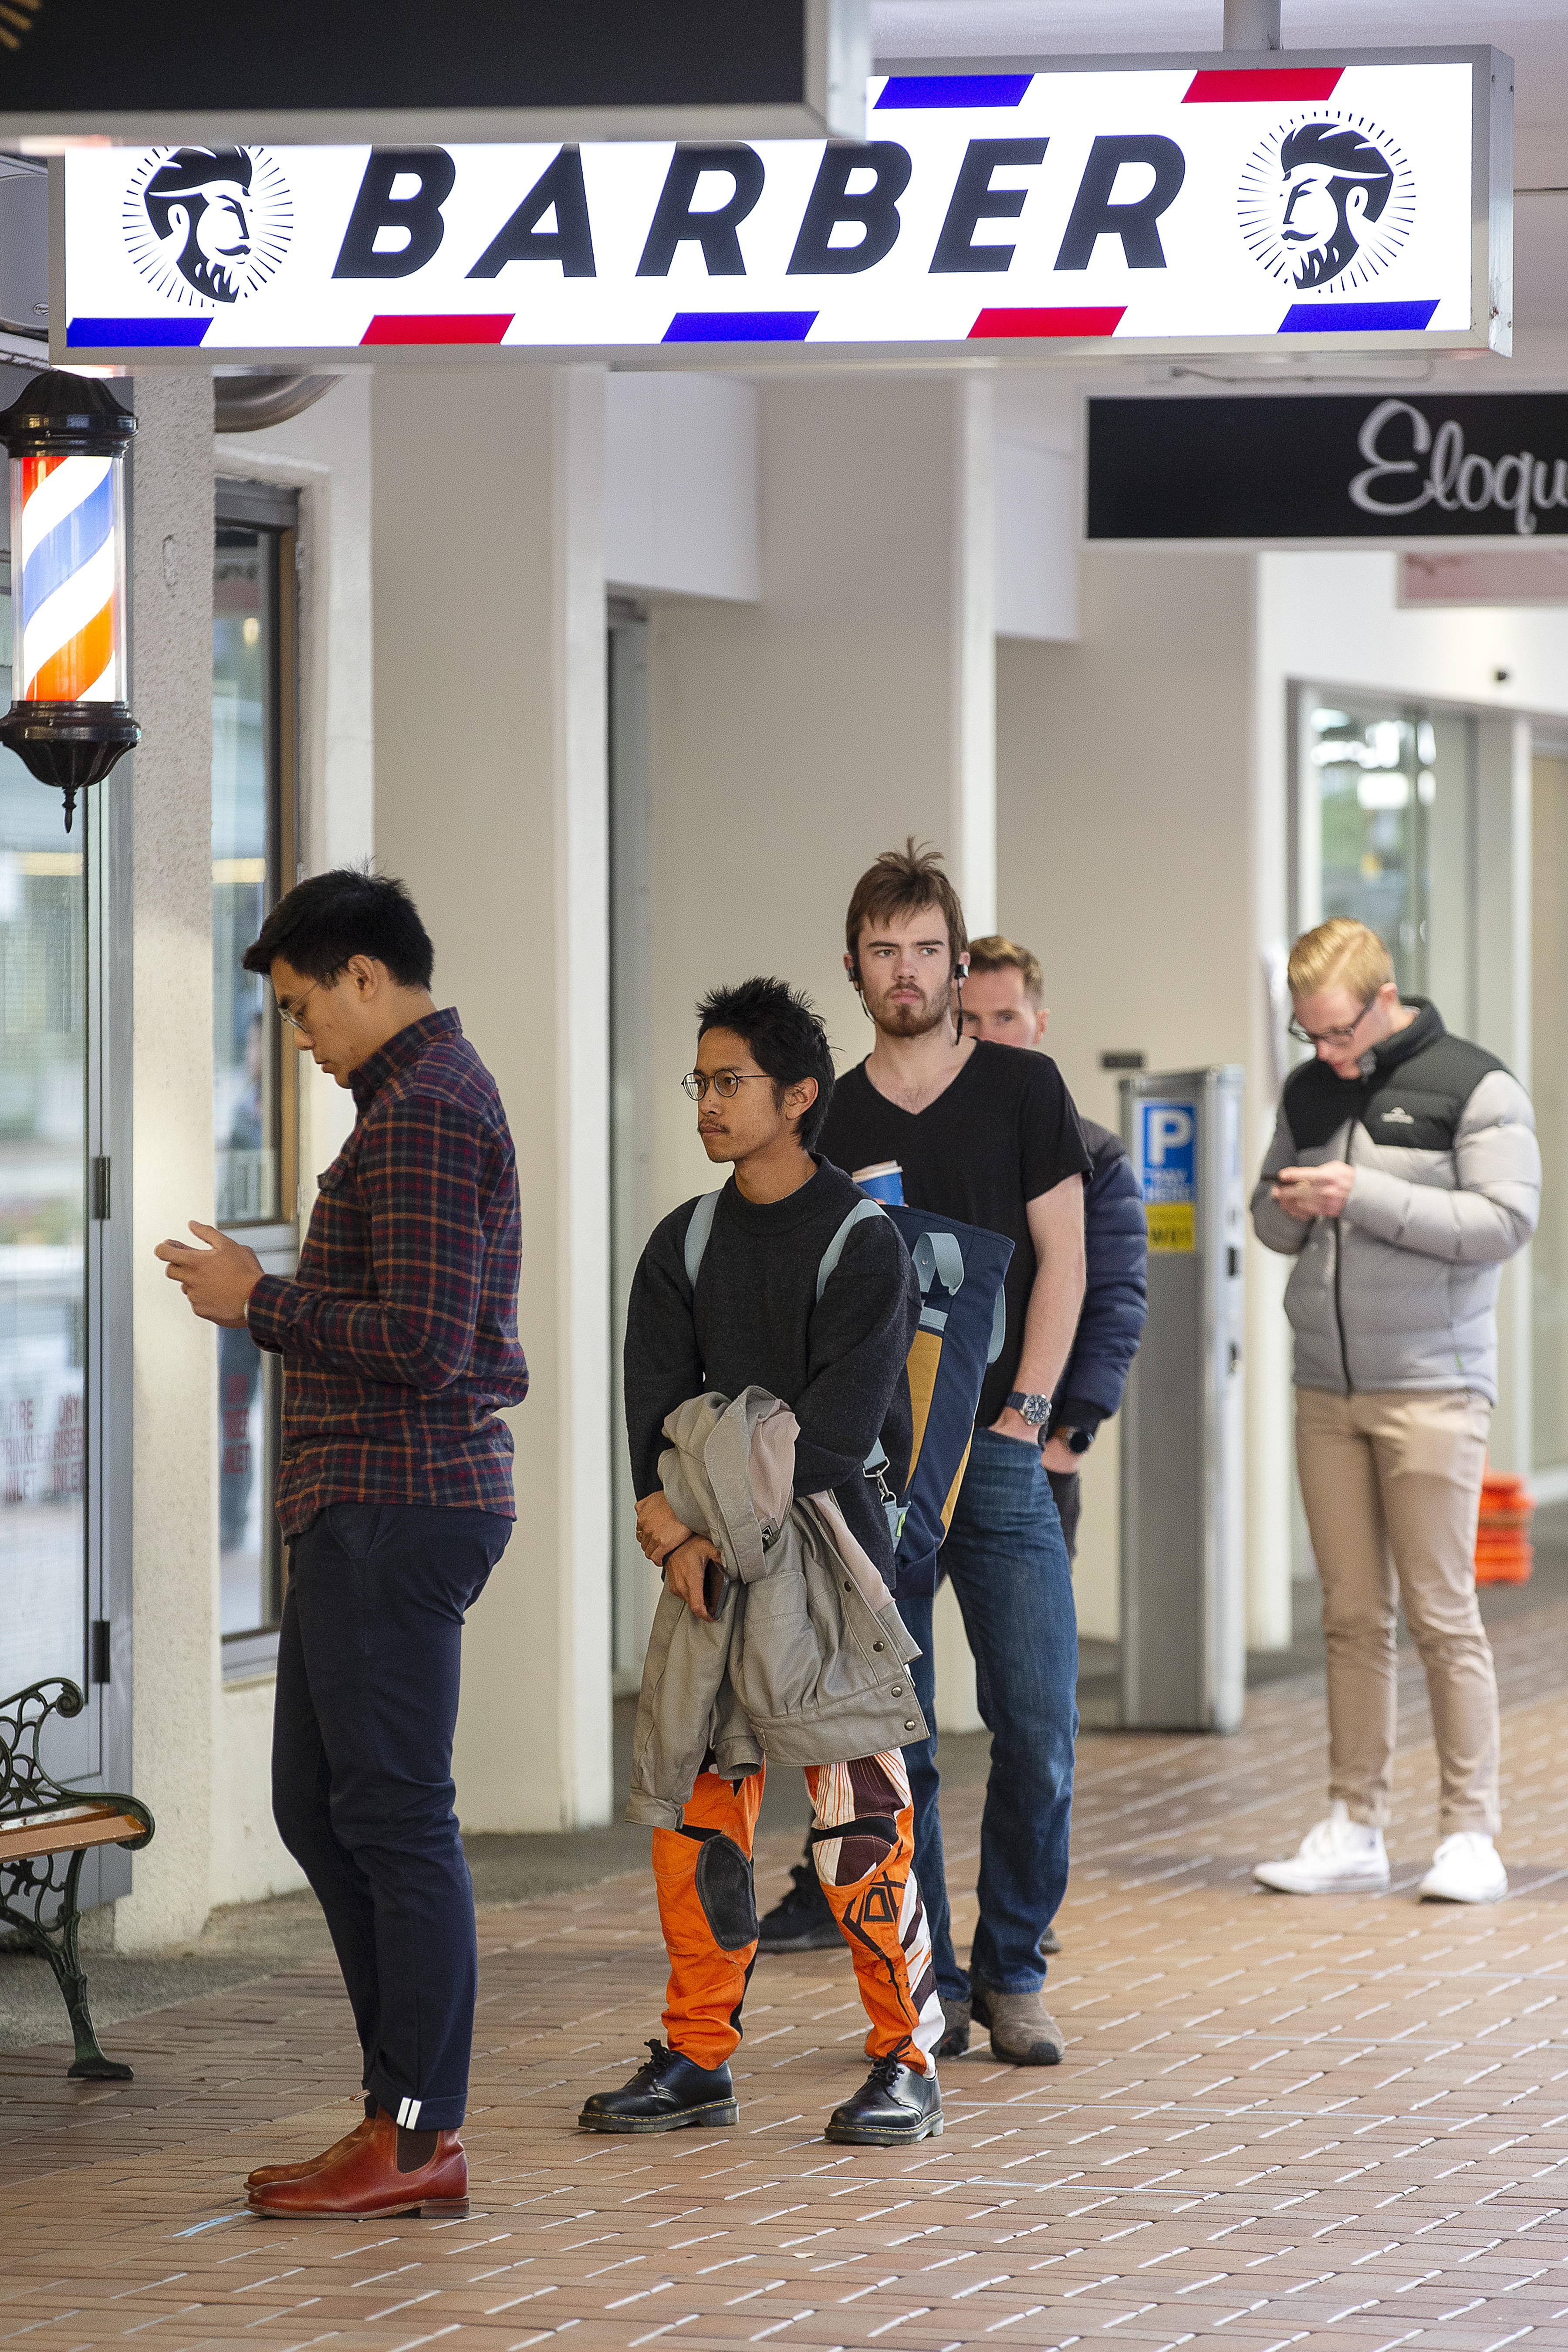 Customers queue up for a haircut at The French Barber on May 14, 2020 in Wellington, New Zealand. New Zealand moves to COVID-19 Alert Level 2 in three stages starting from today with restaurants, cinemas, retail, playgrounds and gyms able to reopen with physical distancing and strict hygiene measures in place. Public gatherings are permitted for up to 10 people and New Zealanders are now able to travel domestically. Schools and early childhood centres will open from Monday 18 May while bars will be allowed to reopen from Thursday 21 May. New Zealand was placed under full lockdown on March 26 in response to the coronavirus (COVID-19) pandemic. (Photo by Hagen Hopkins/Getty Images)